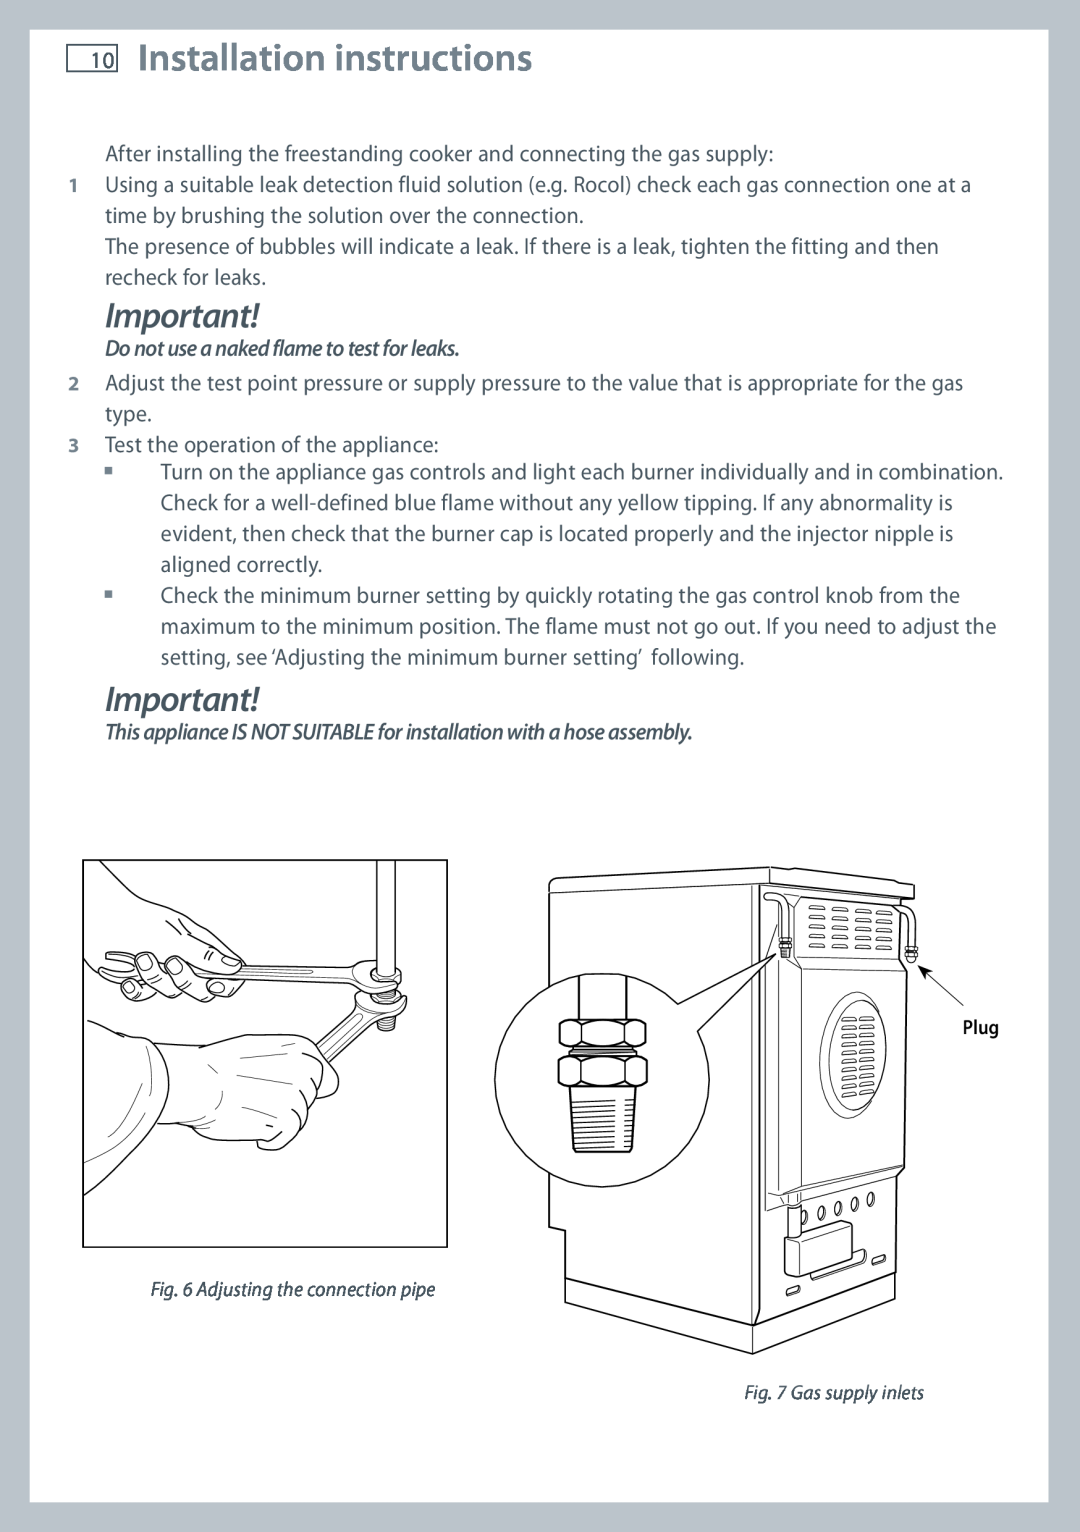 Fisher & Paykel 60 installation instructions Installation instructions, Do not use a naked flame to test for leaks 